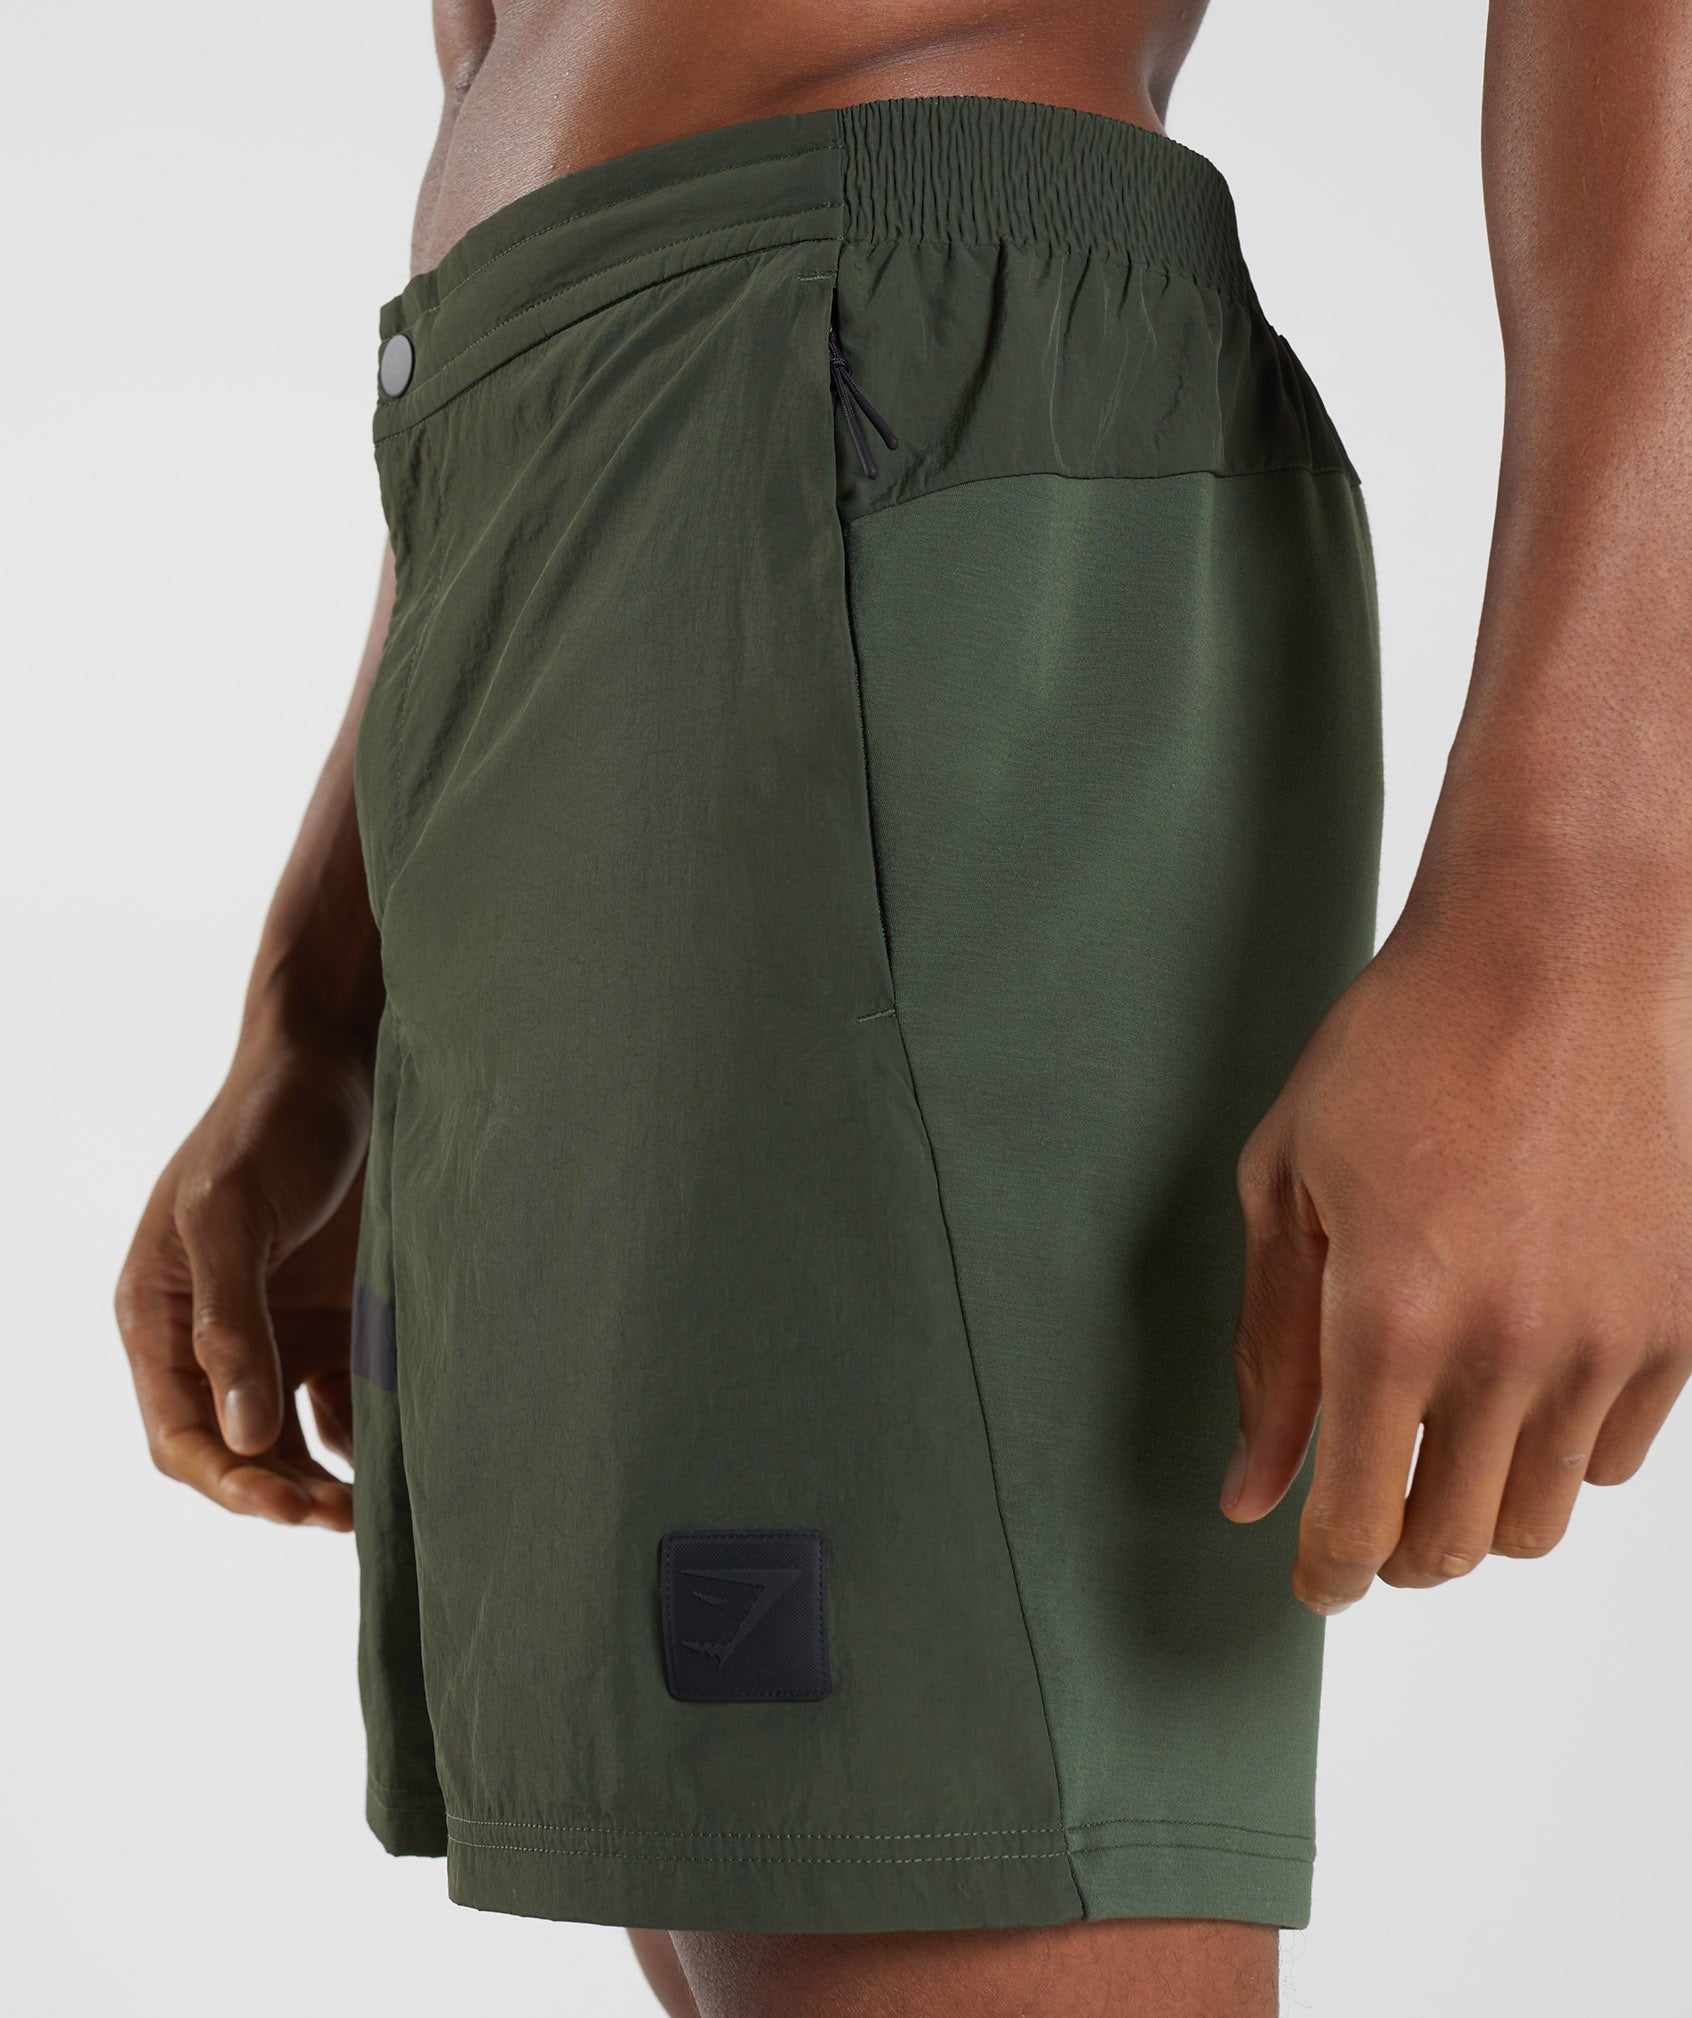 Retake Woven 7" Shorts in Moss Olive